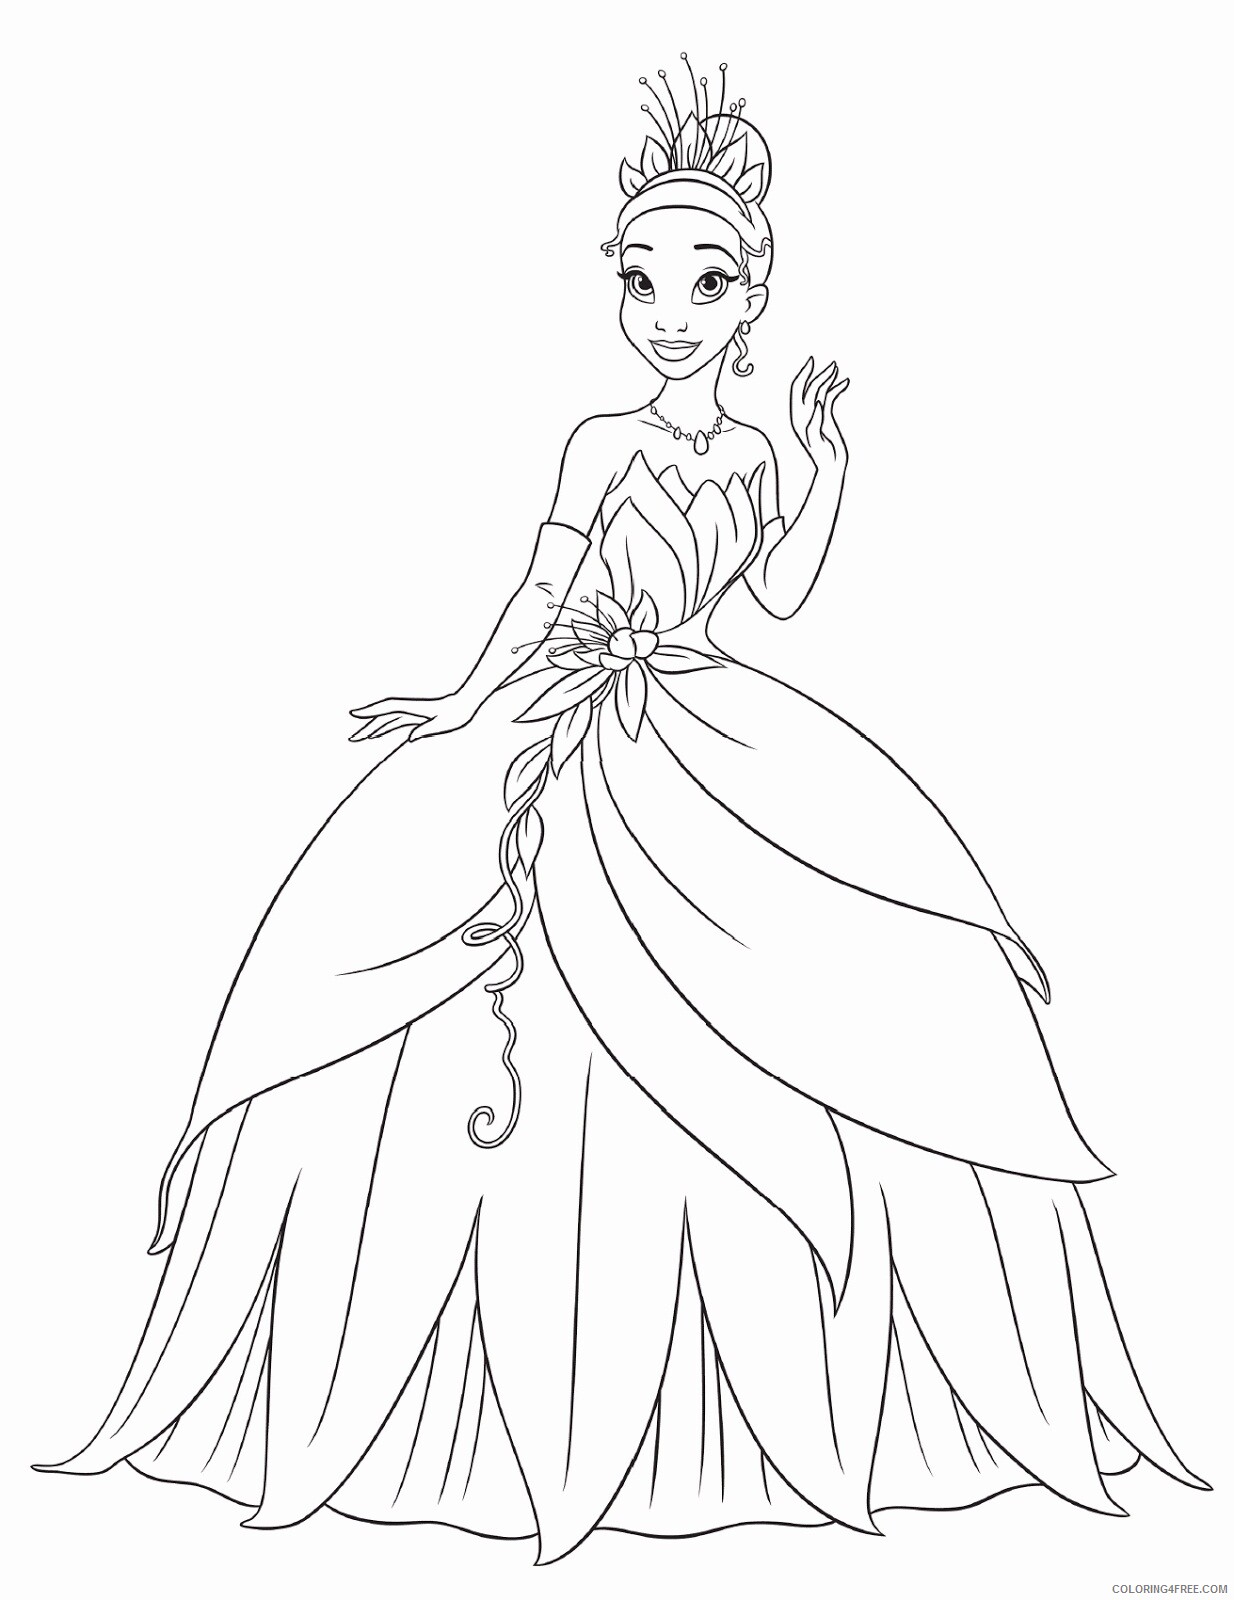 Princess Coloring Pages for Girls Princess Tiana For Kids Printable 2021 1138 Coloring4free